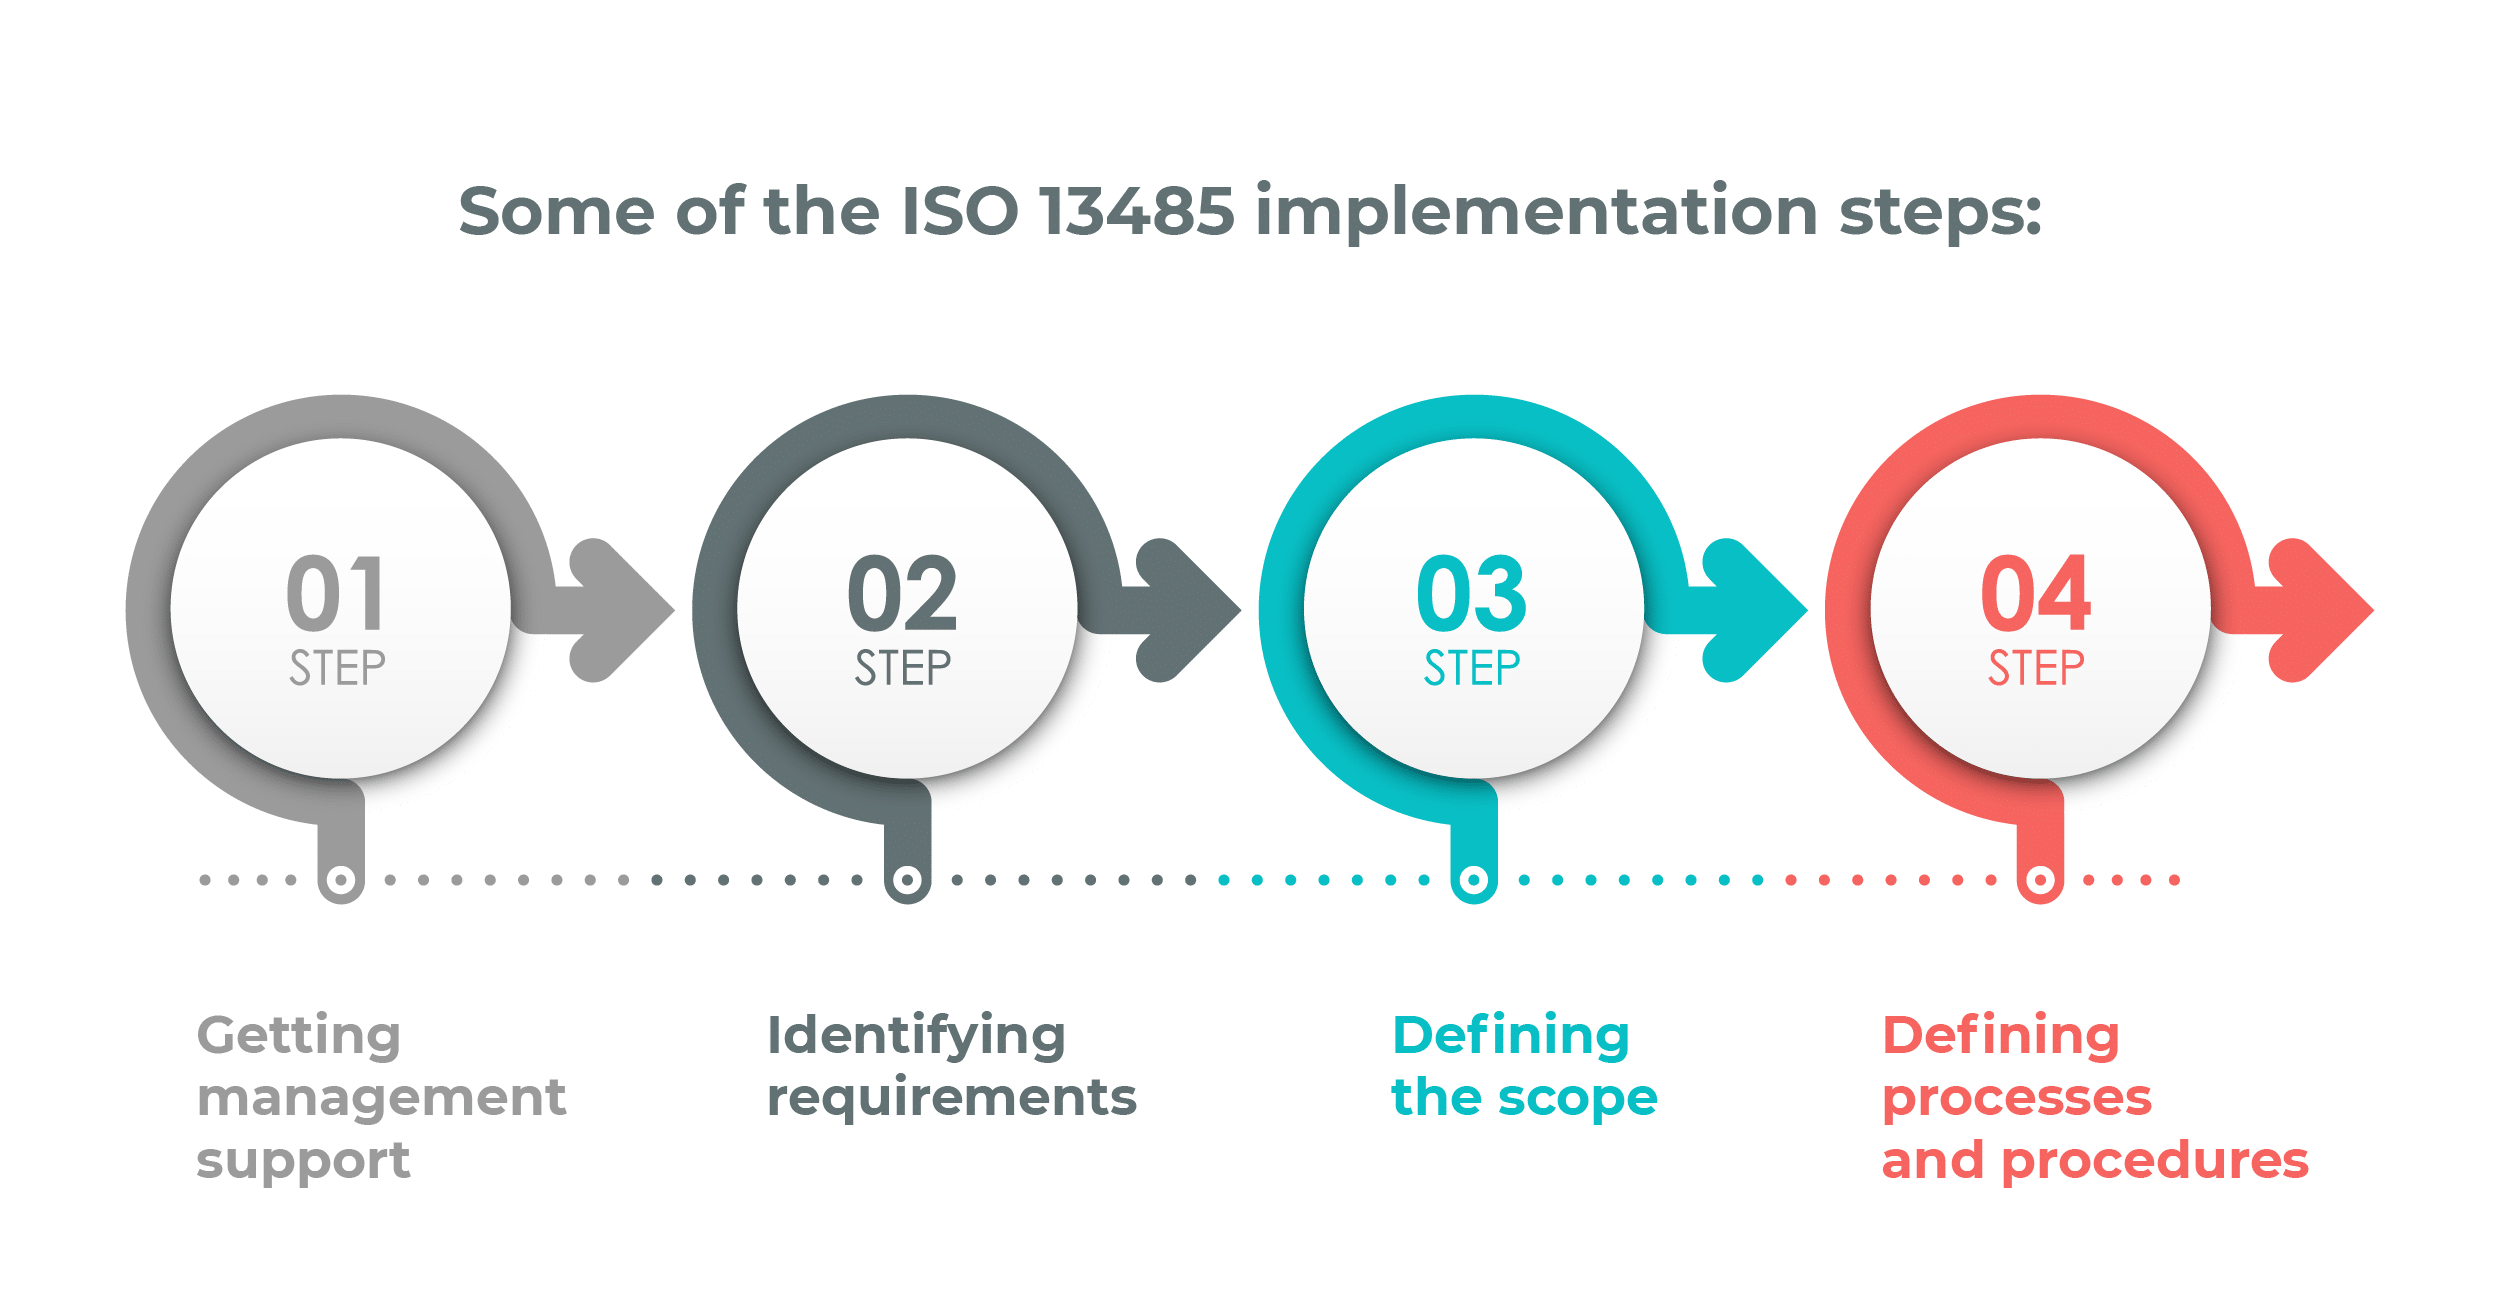 Some of the ISO 13485 implementation steps